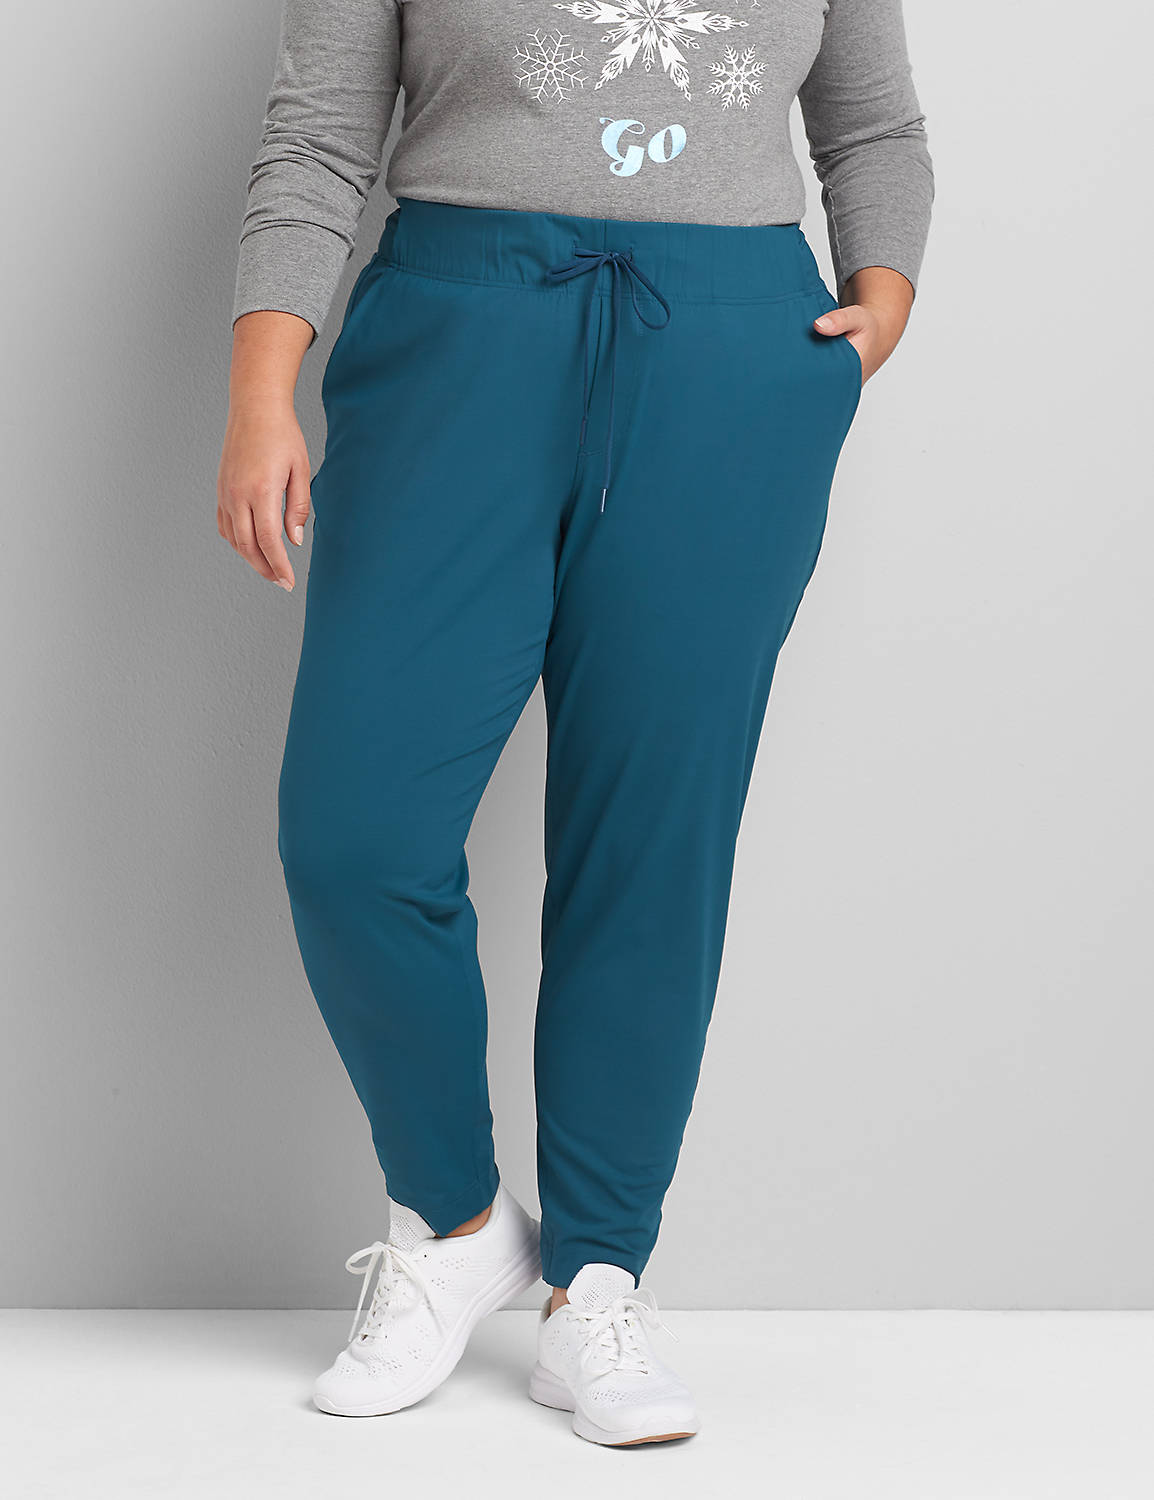 Knit Trouser F 1118054:PANTONE Deep Teal:22/24 Product Image 1